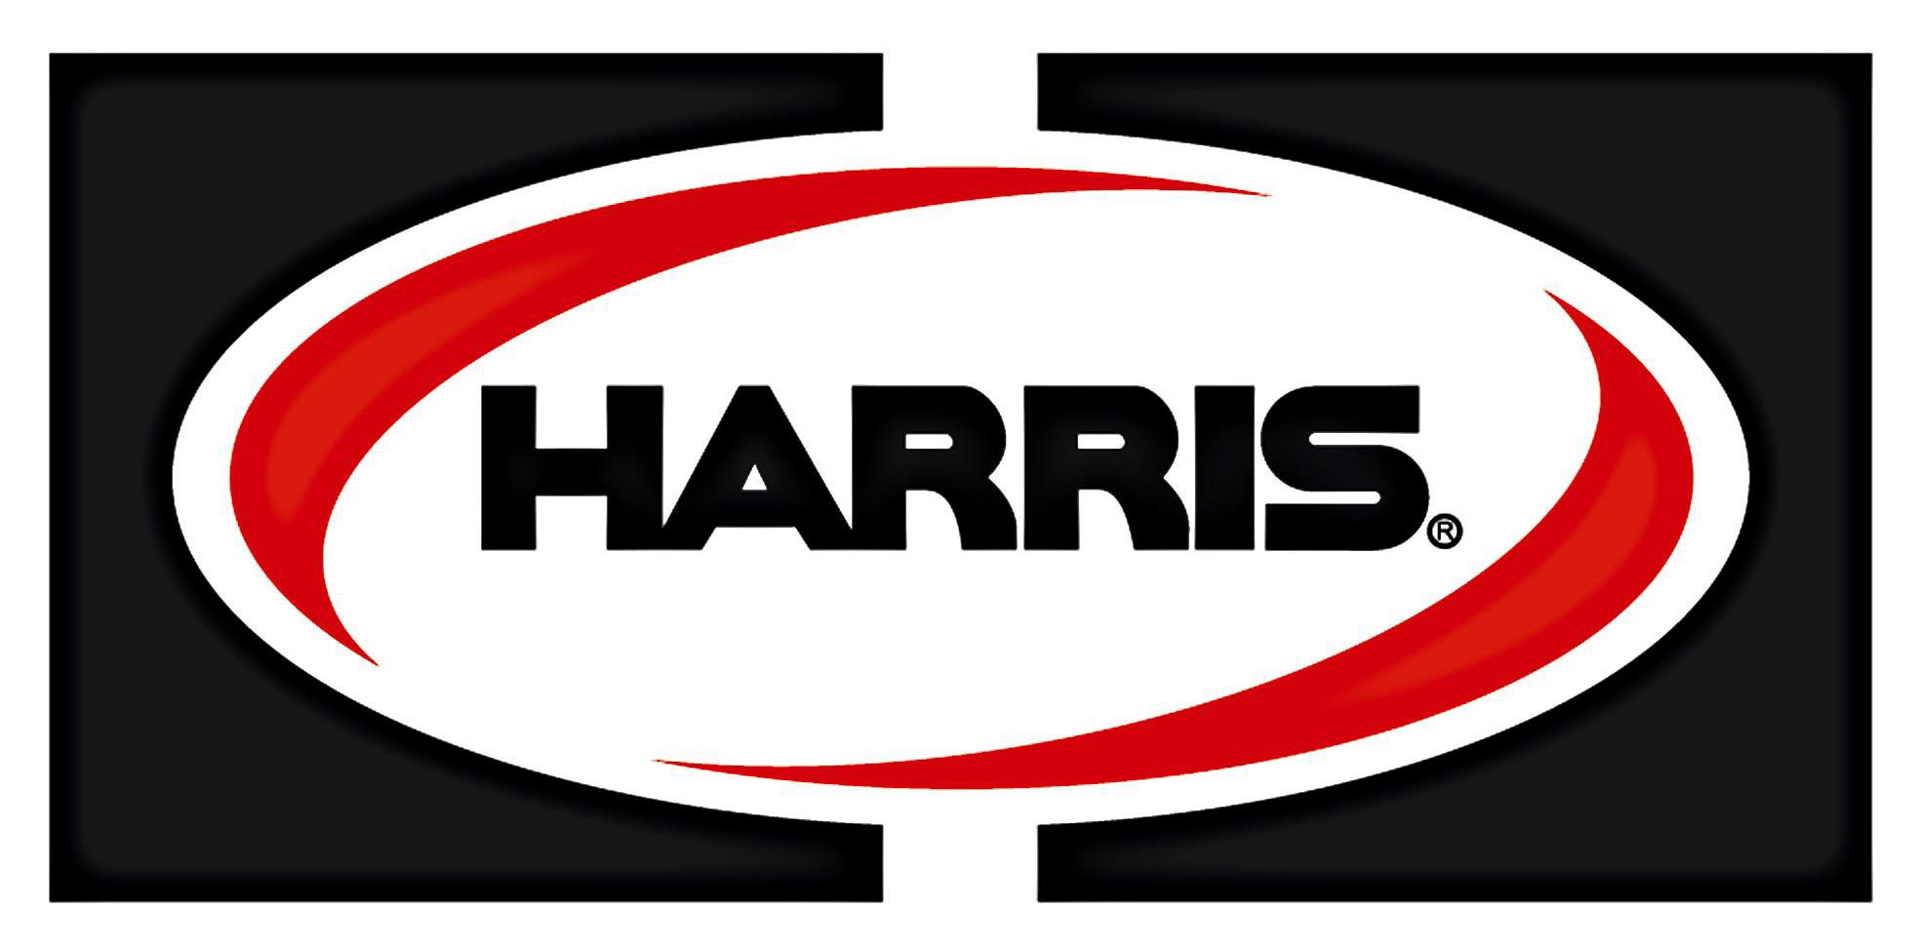 Picture for manufacturer Harris